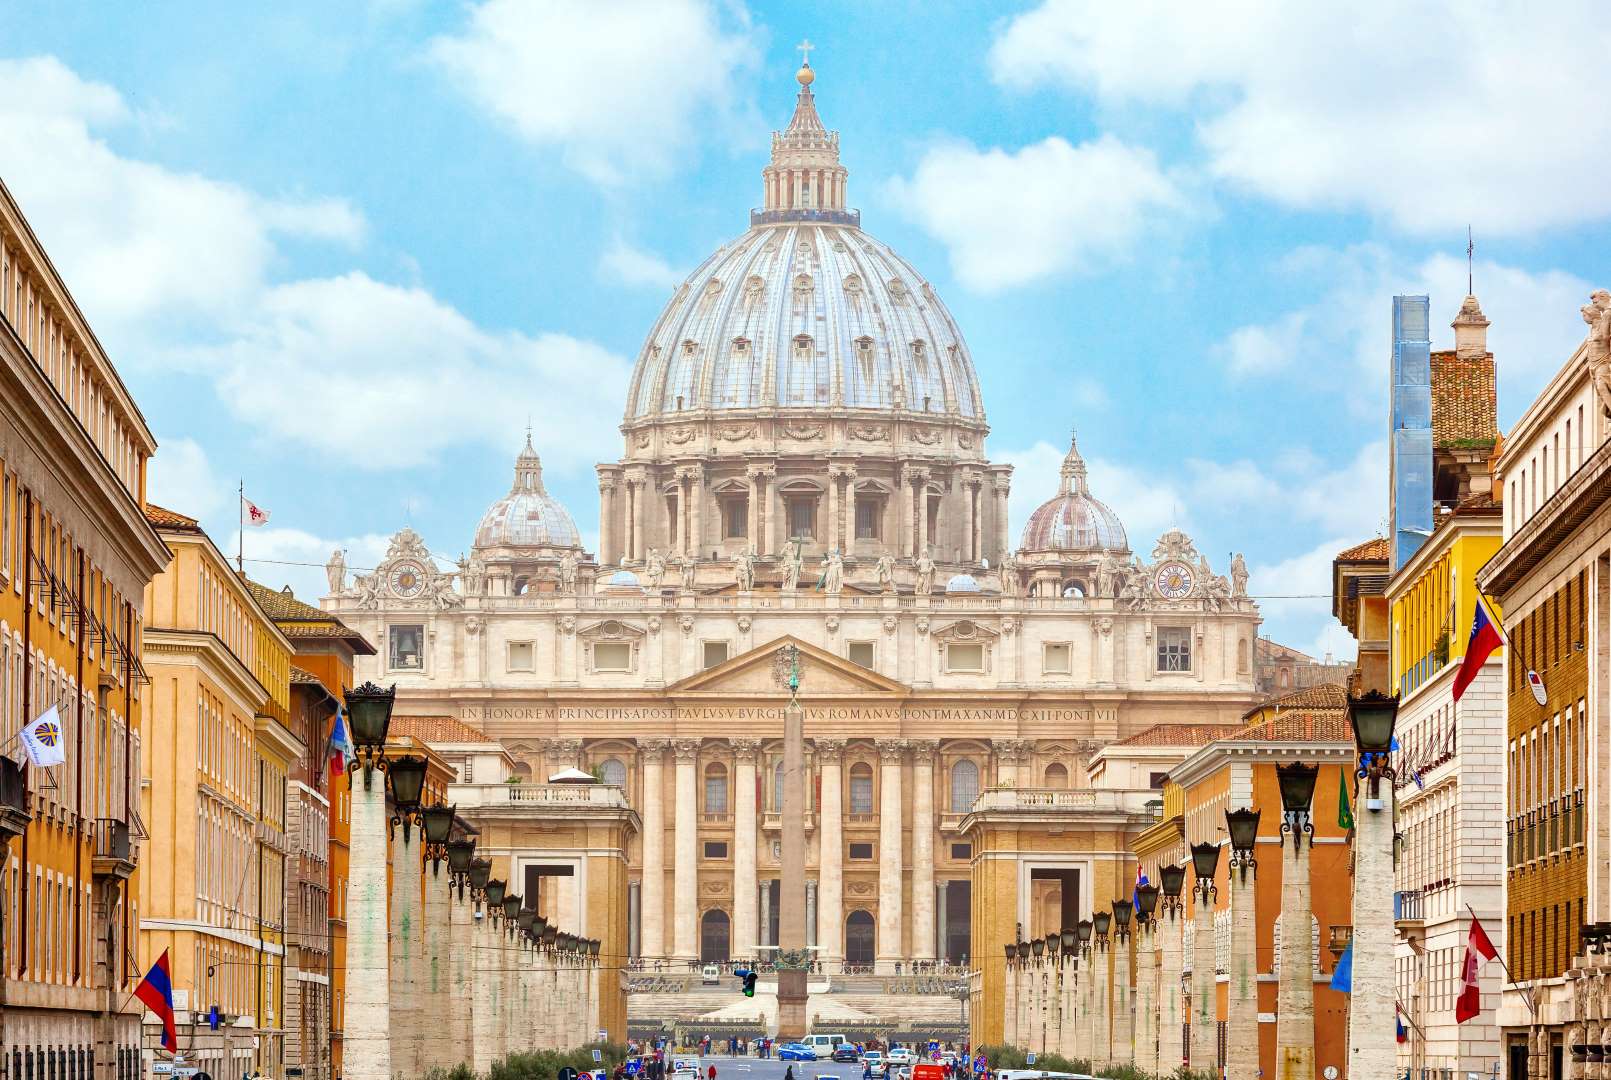 If You Can Name Just 12/20 Countries by Their Famous Landmark, I’ll Be Really Impressed St. Peter's Basilica in Vatican City